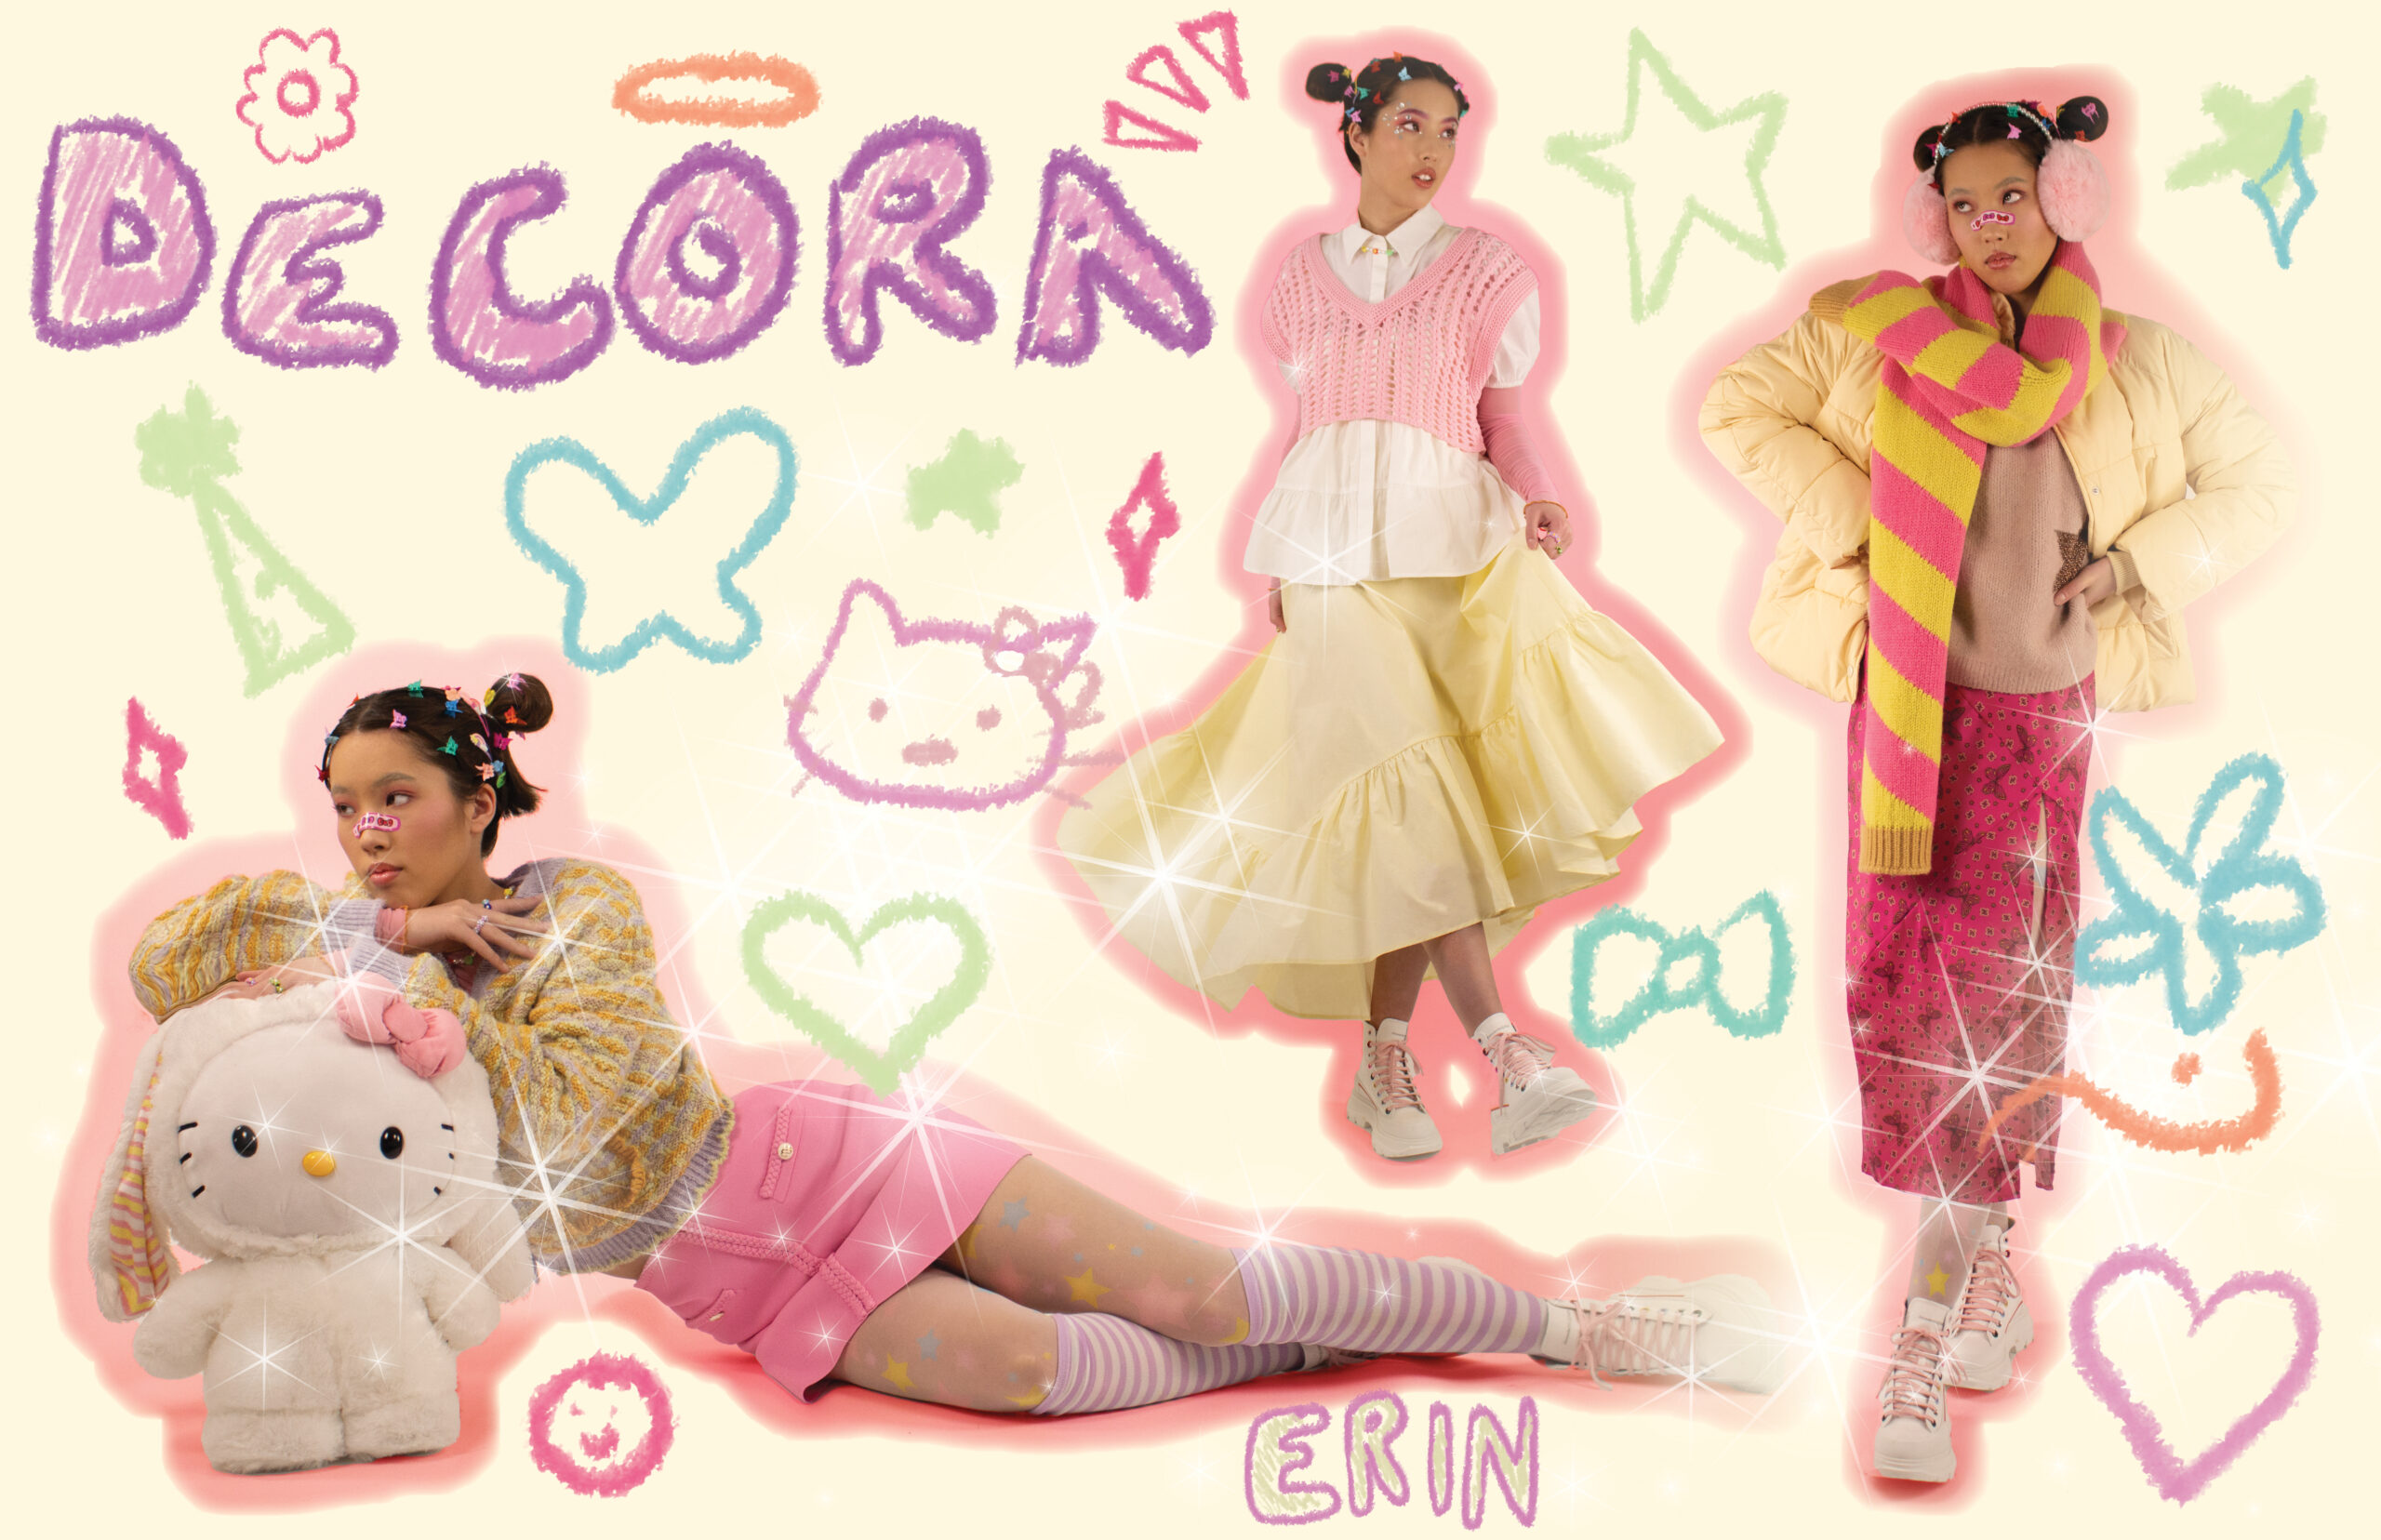 Trend styling of the fashion subculture, Decora. This aesthetic is heavily attached to the youth of Harajuku and originated in the late 90's. The term 'Decora' stems from the word decoration, due to the importance of decorating yourself head-to-toe.